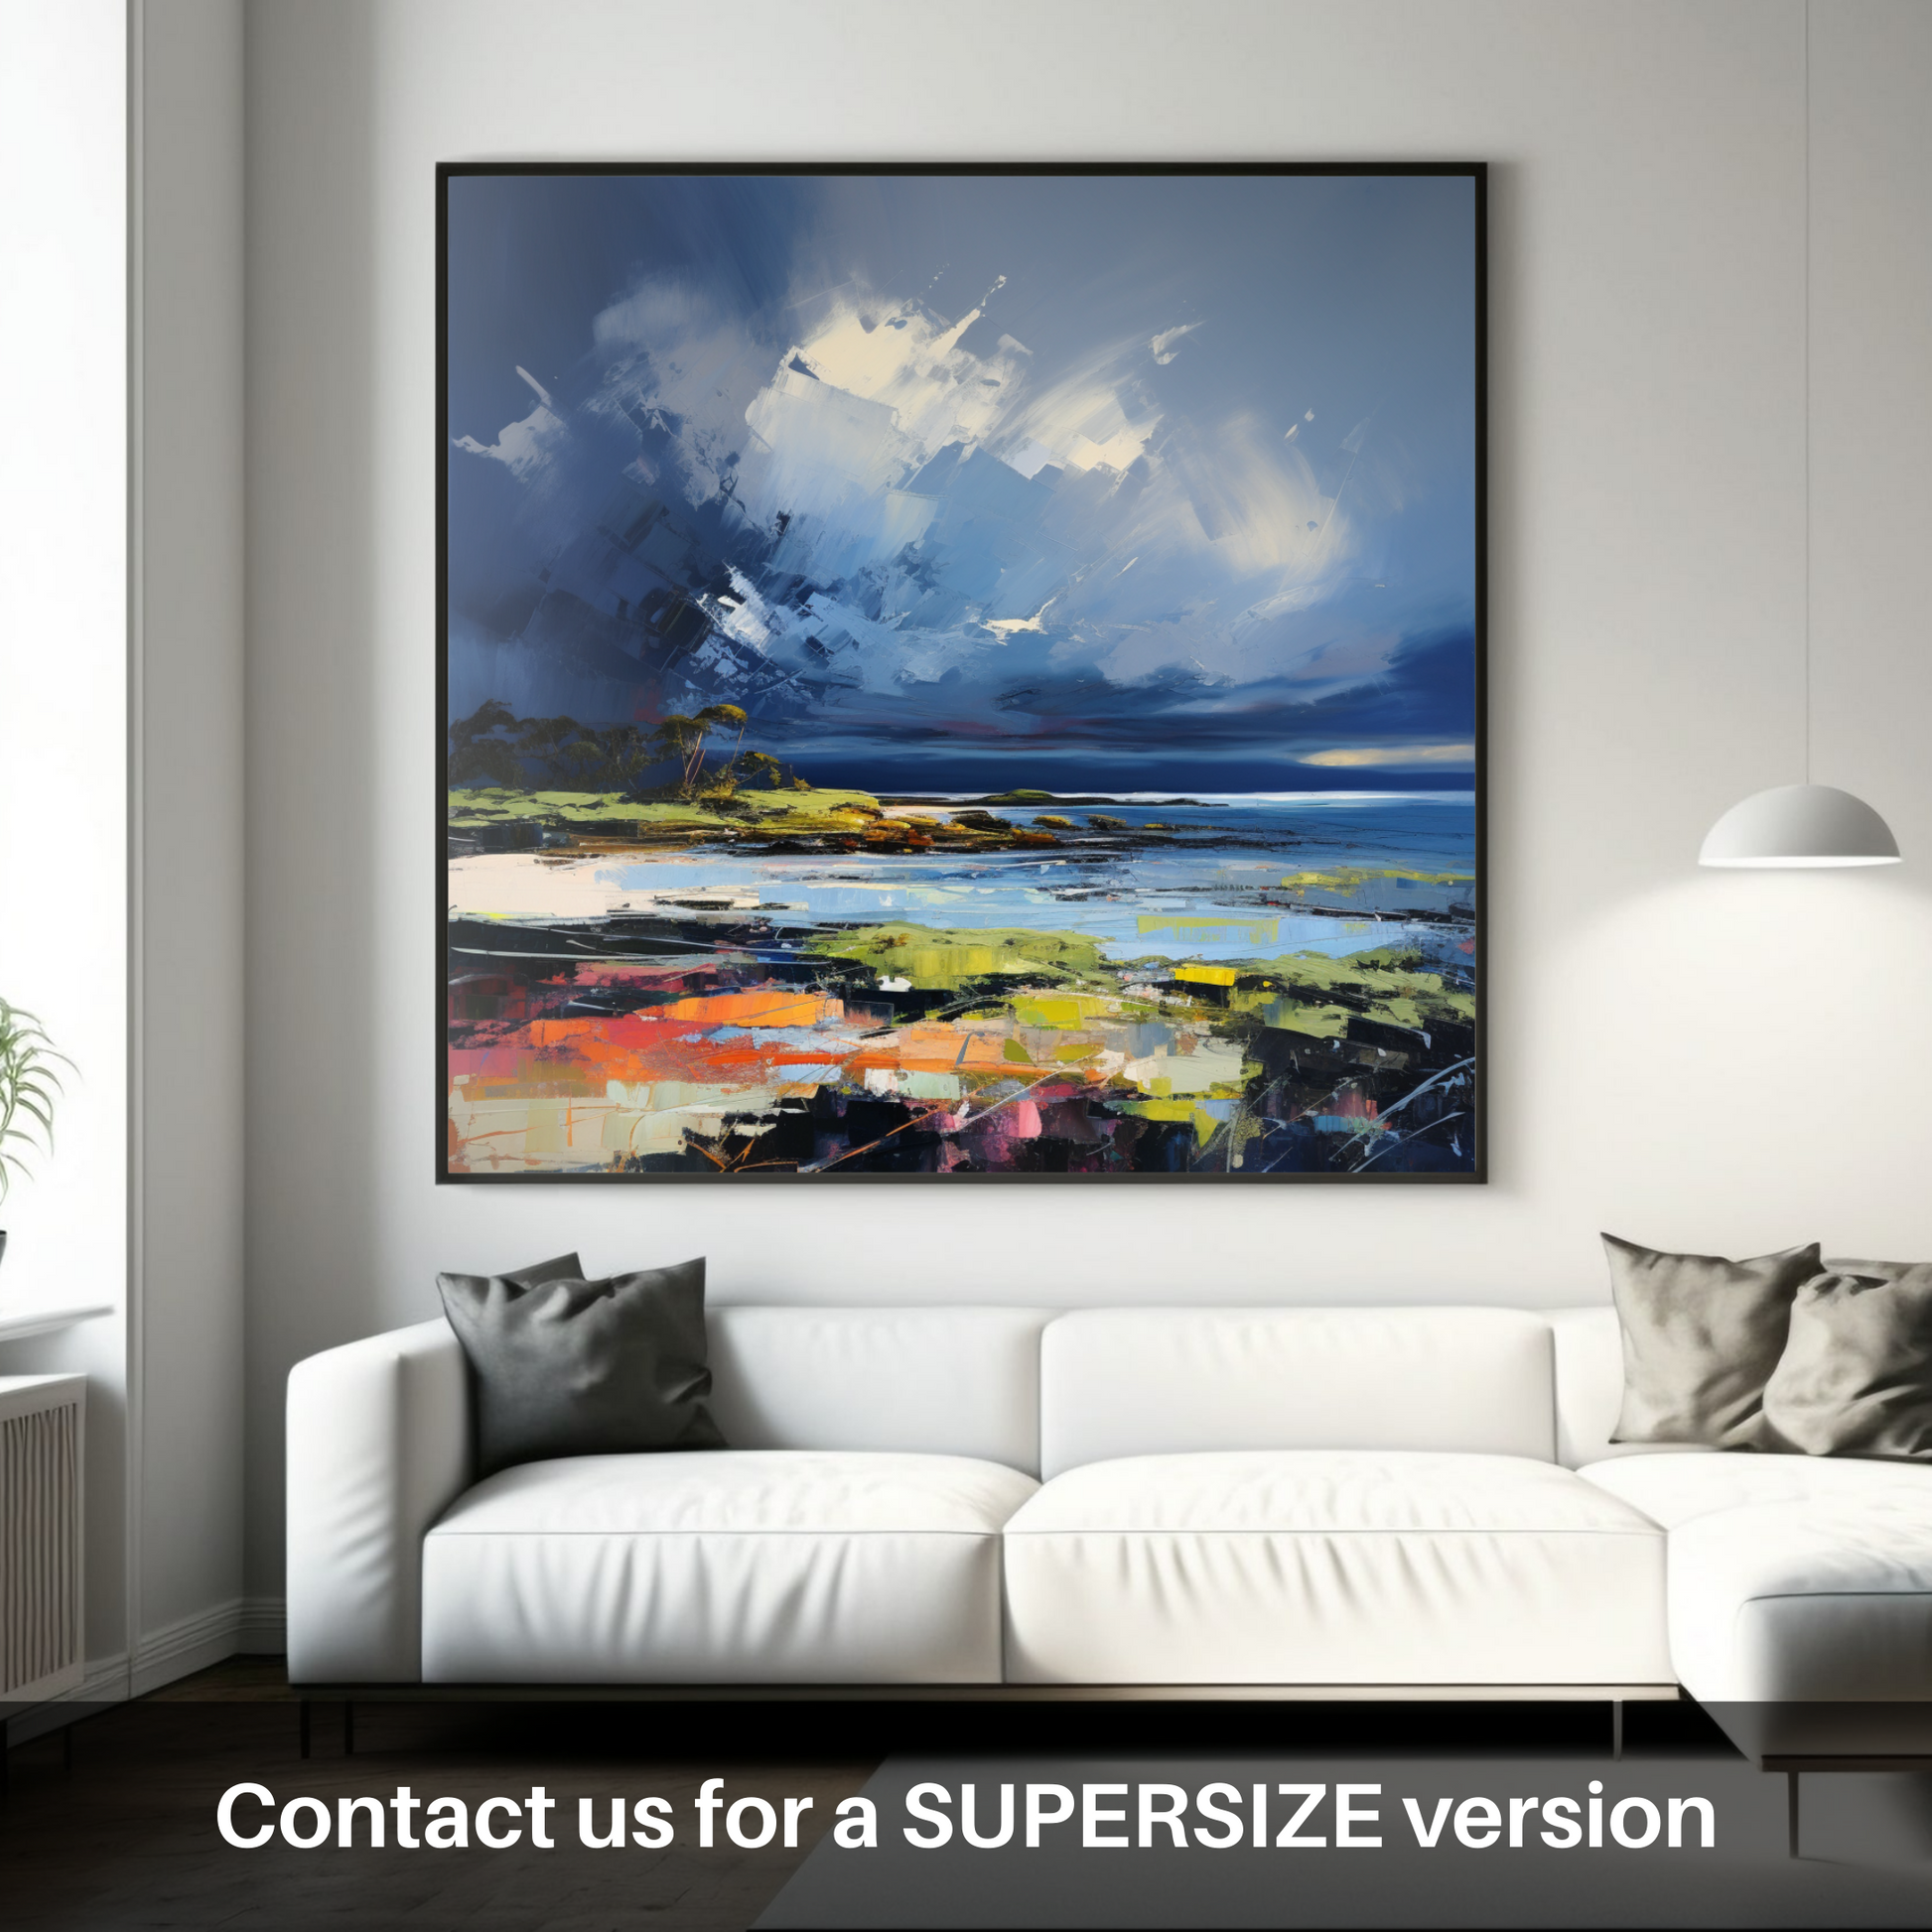 Huge supersize print of Largo Bay with a stormy sky